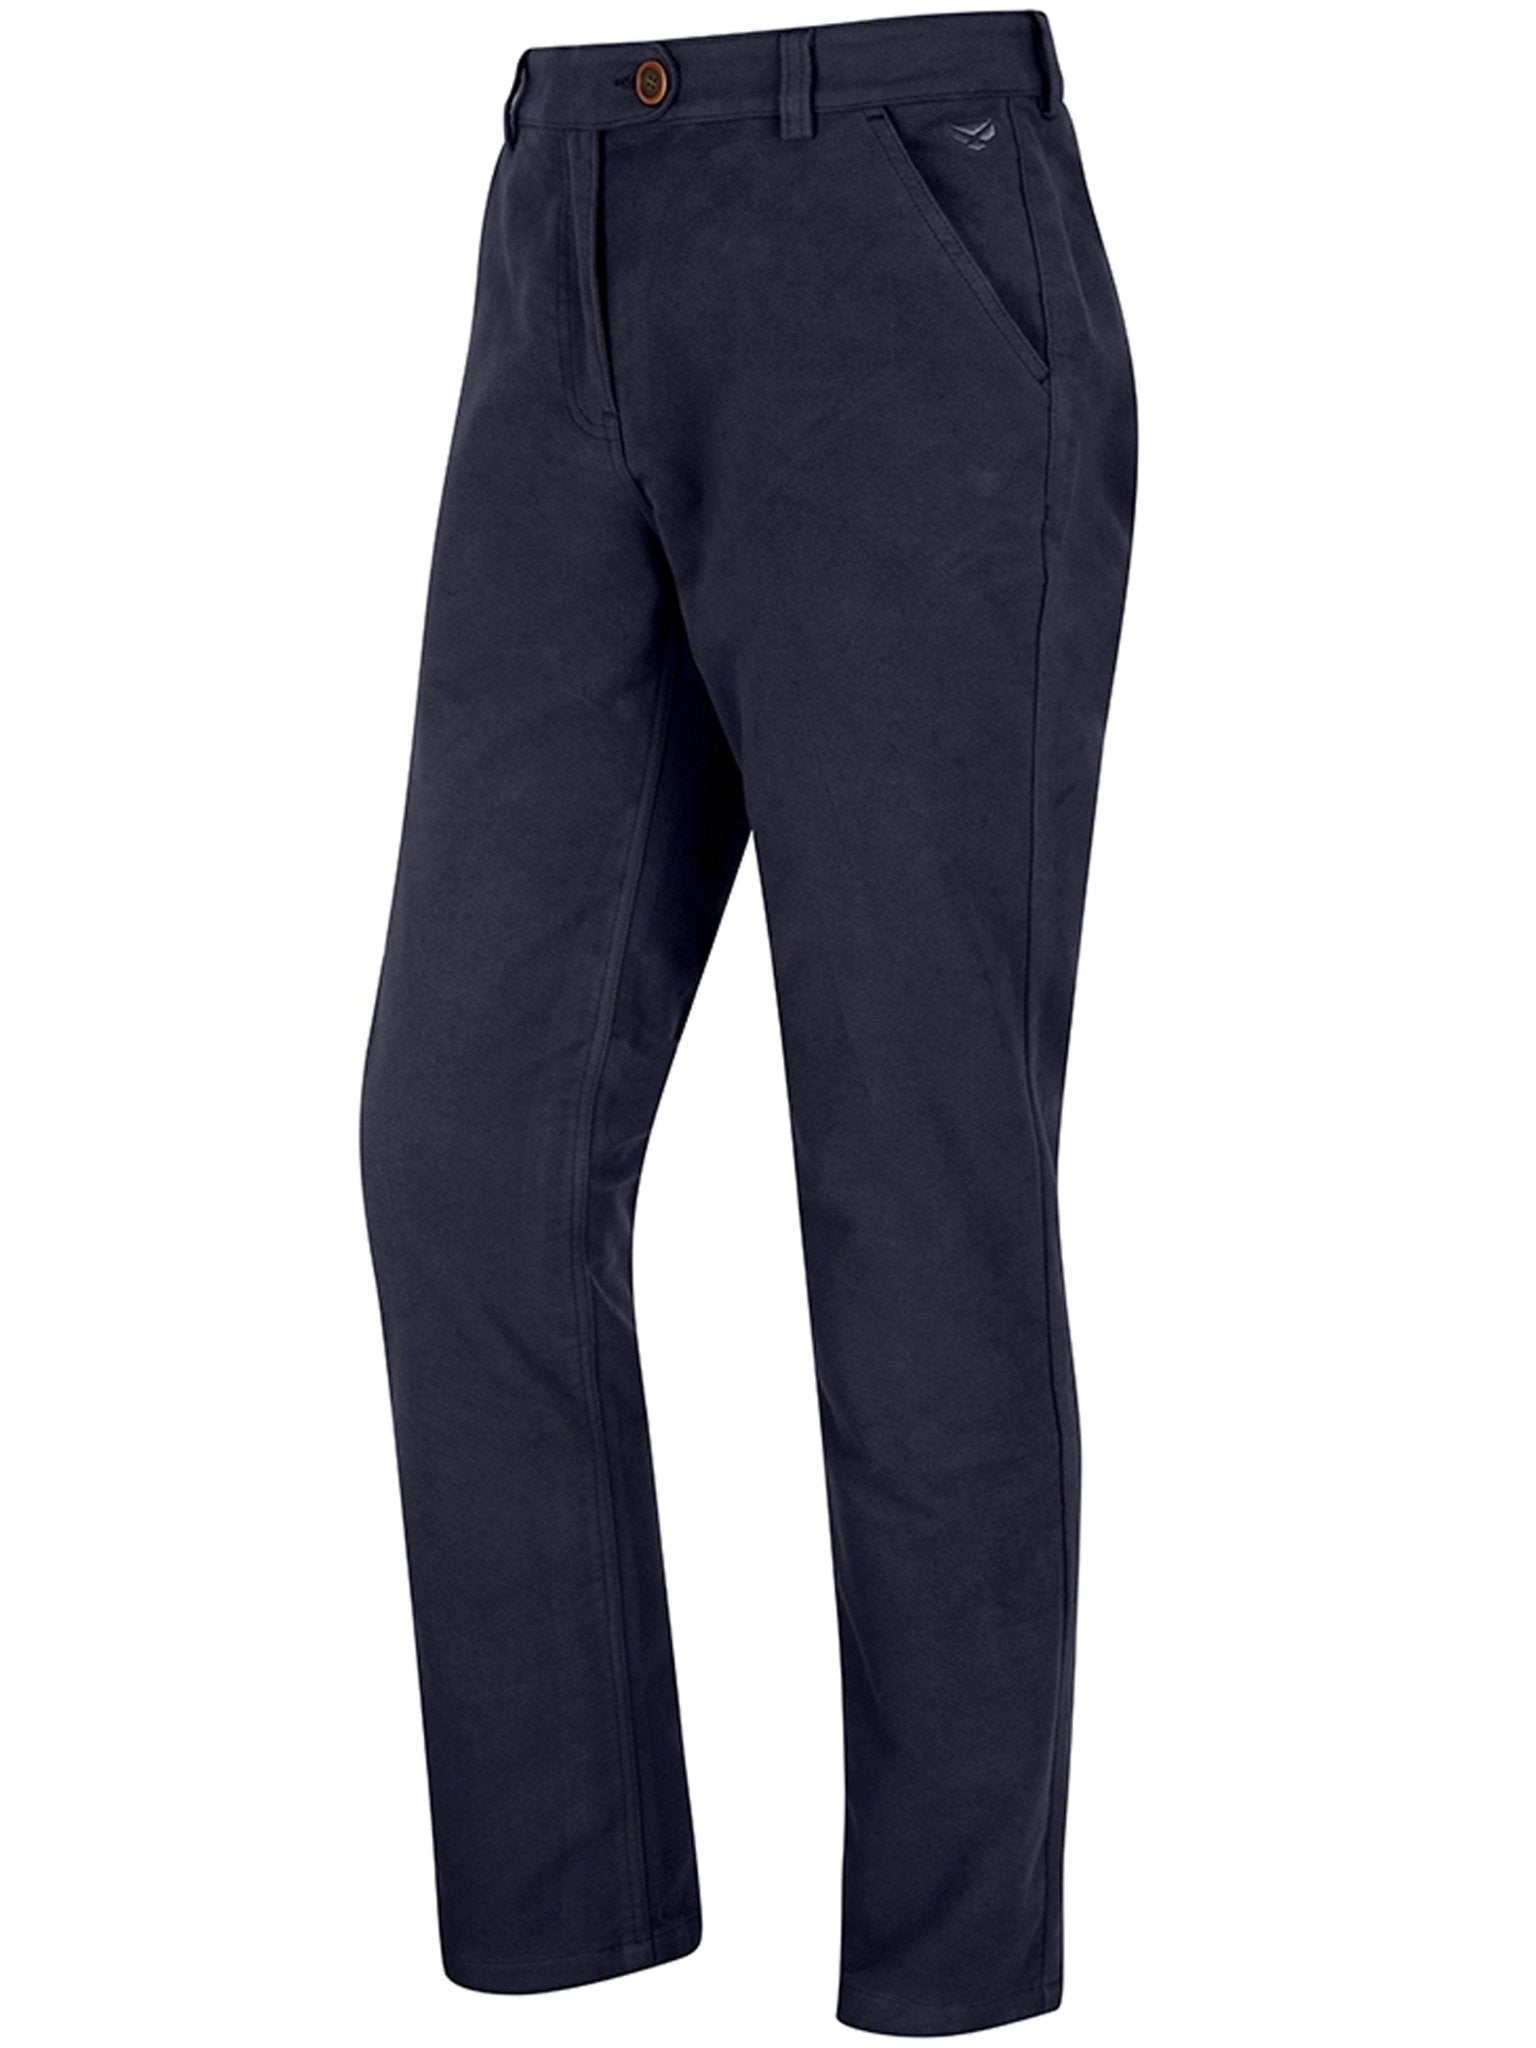 Buy Black Stretch Smart Trousers from the Next UK online shop